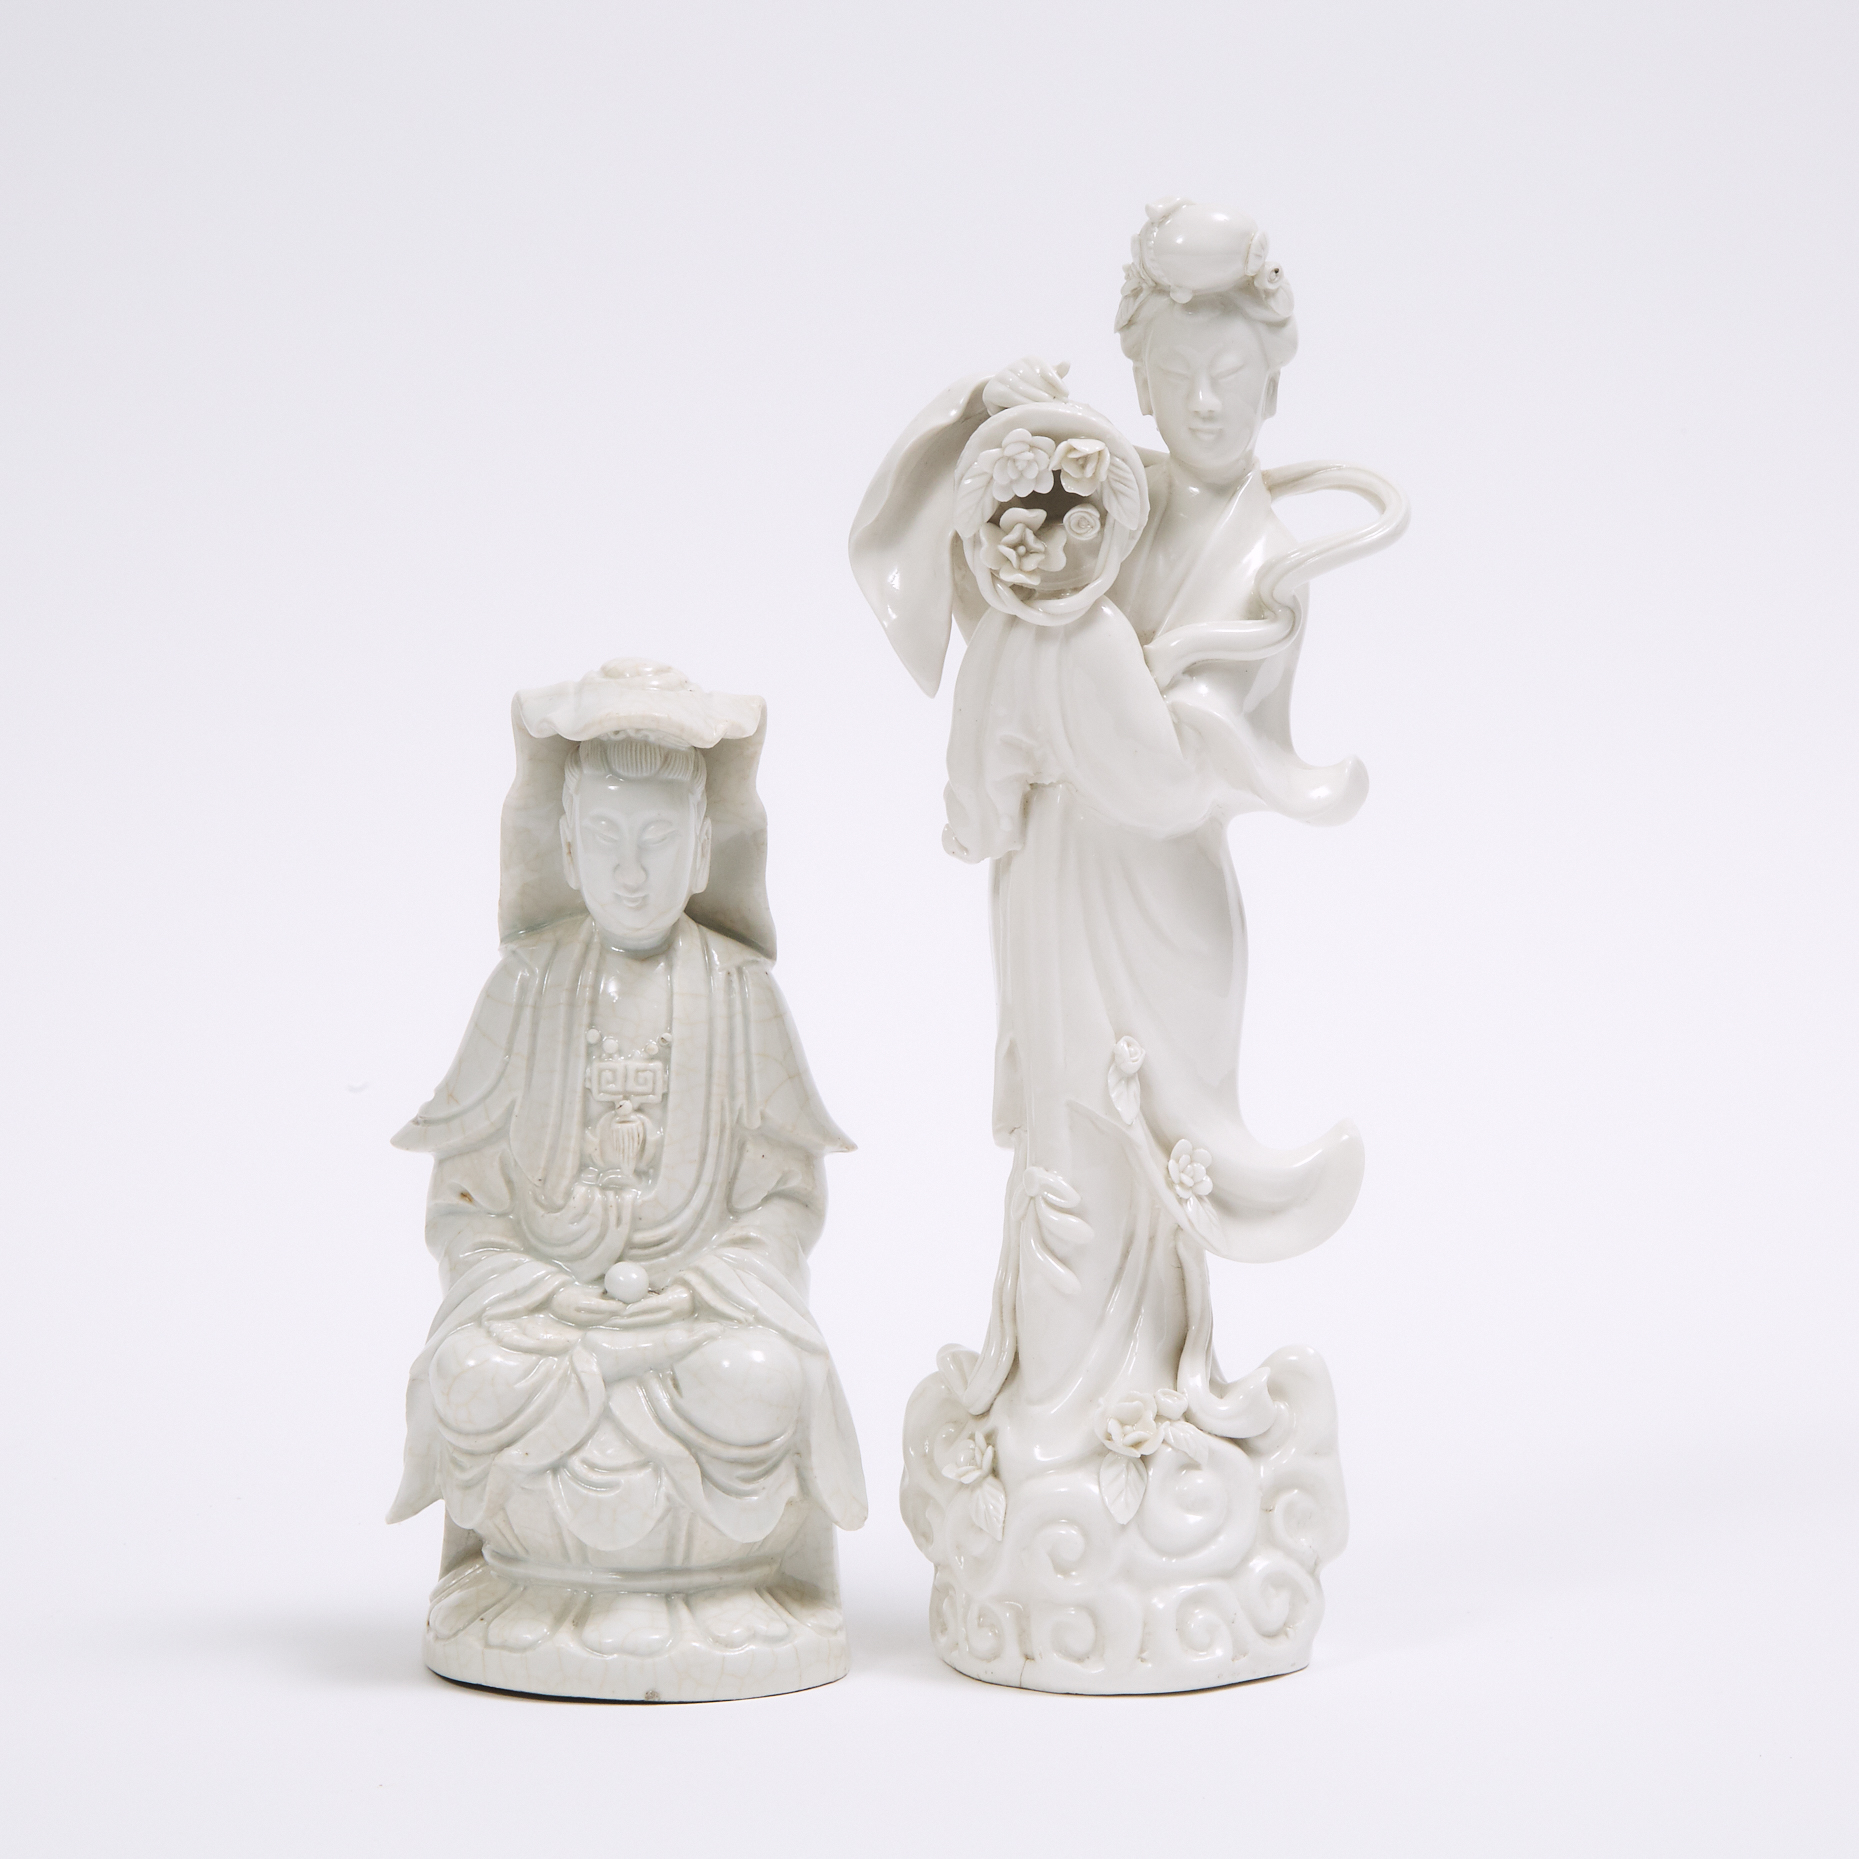 Two Blanc de Chine Figures, 18th Century and Later